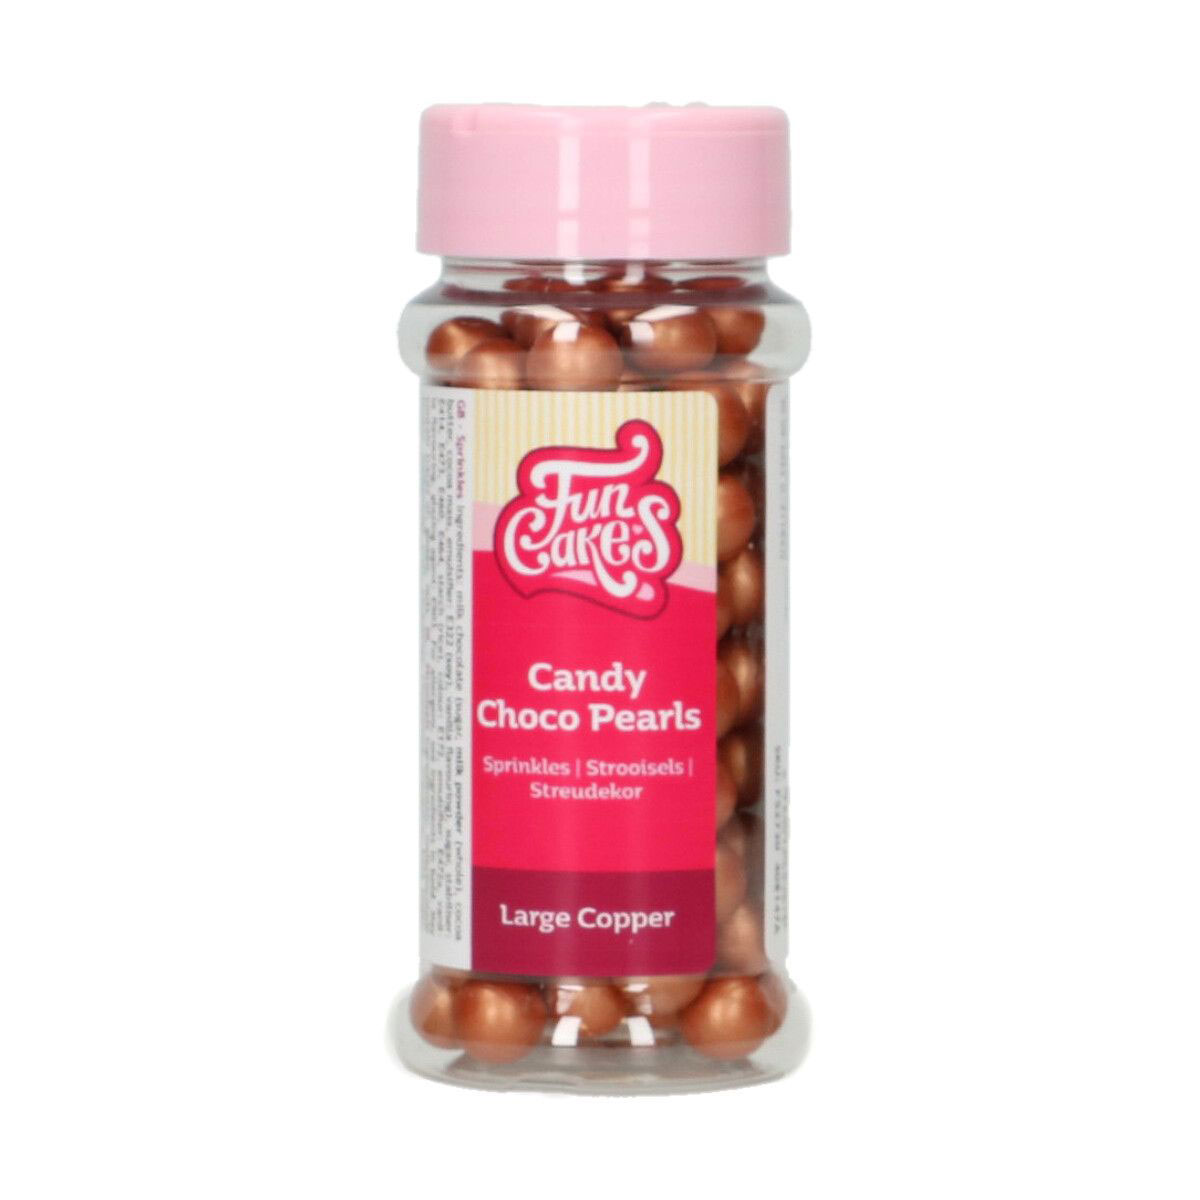 FunCakes Candy Choco Pearls Large Copper 70g